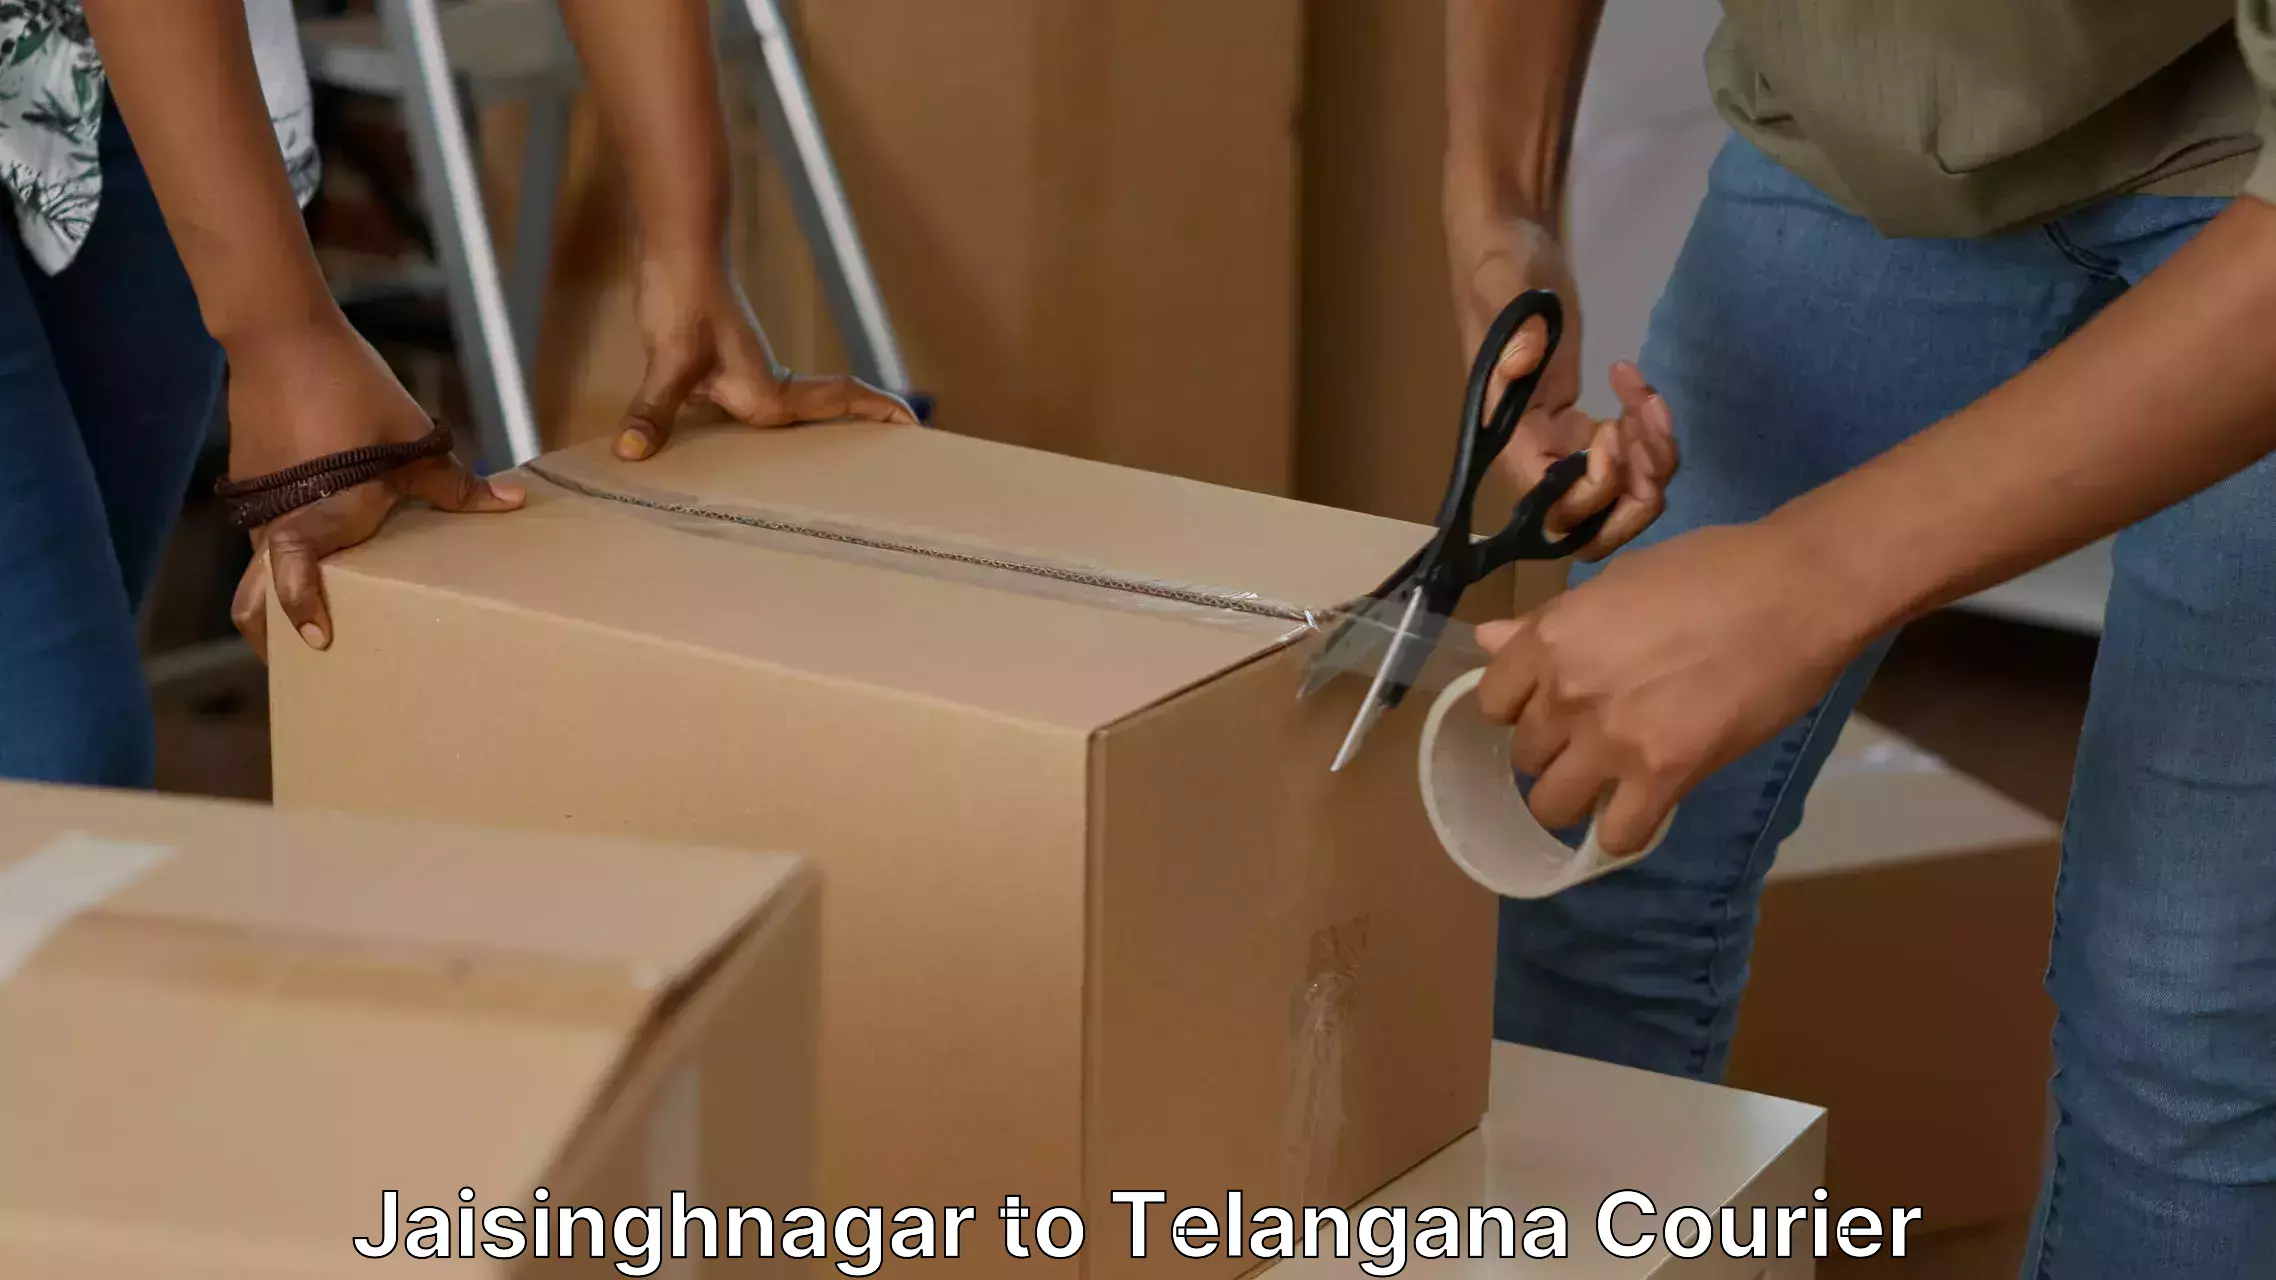 Dependable moving services Jaisinghnagar to Hyderabad